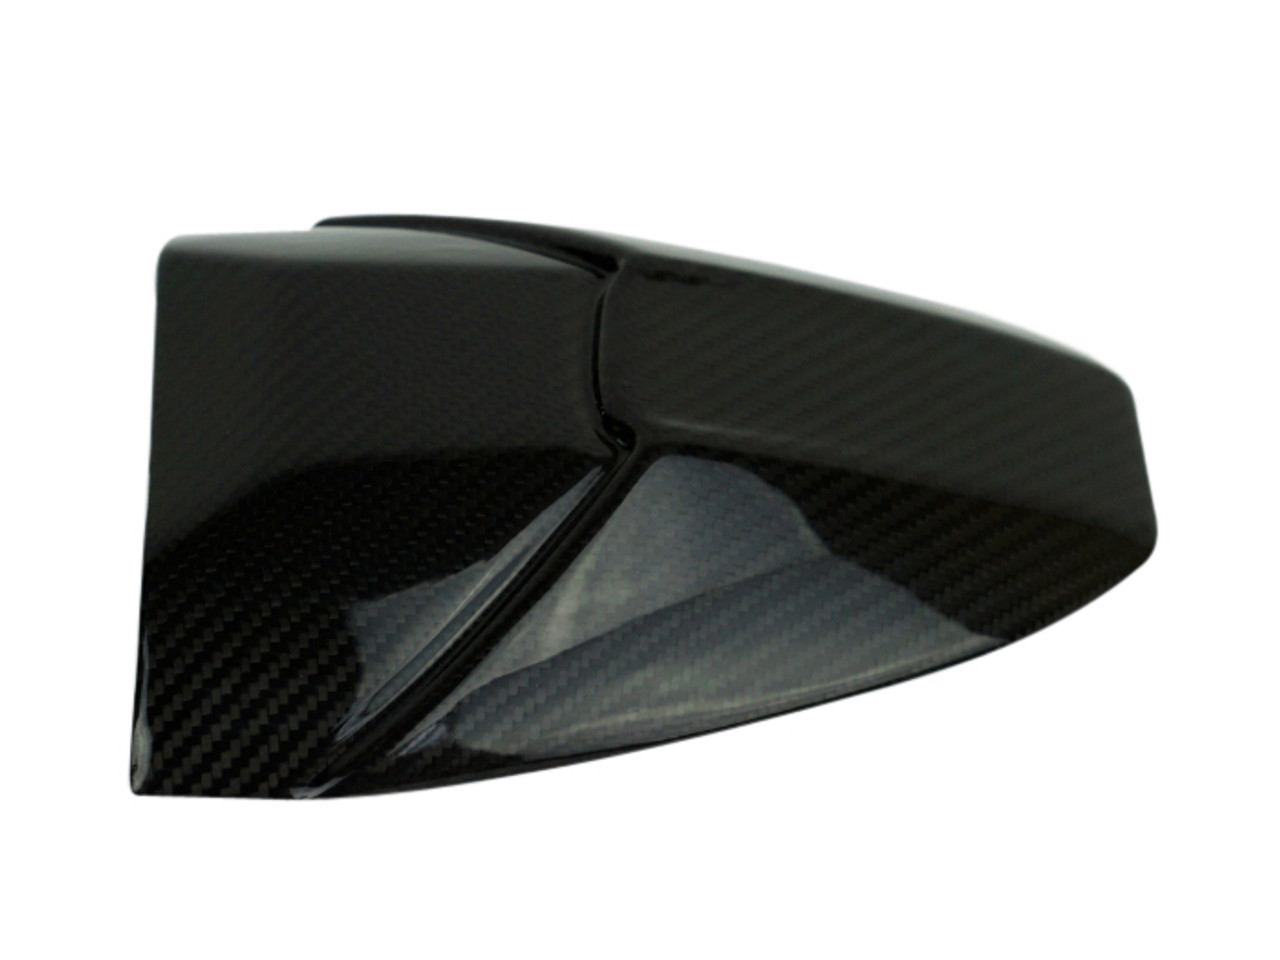 Rear Hugger Extension in Glossy Twill Weave shown  for BMW S1000RR, S1000R.